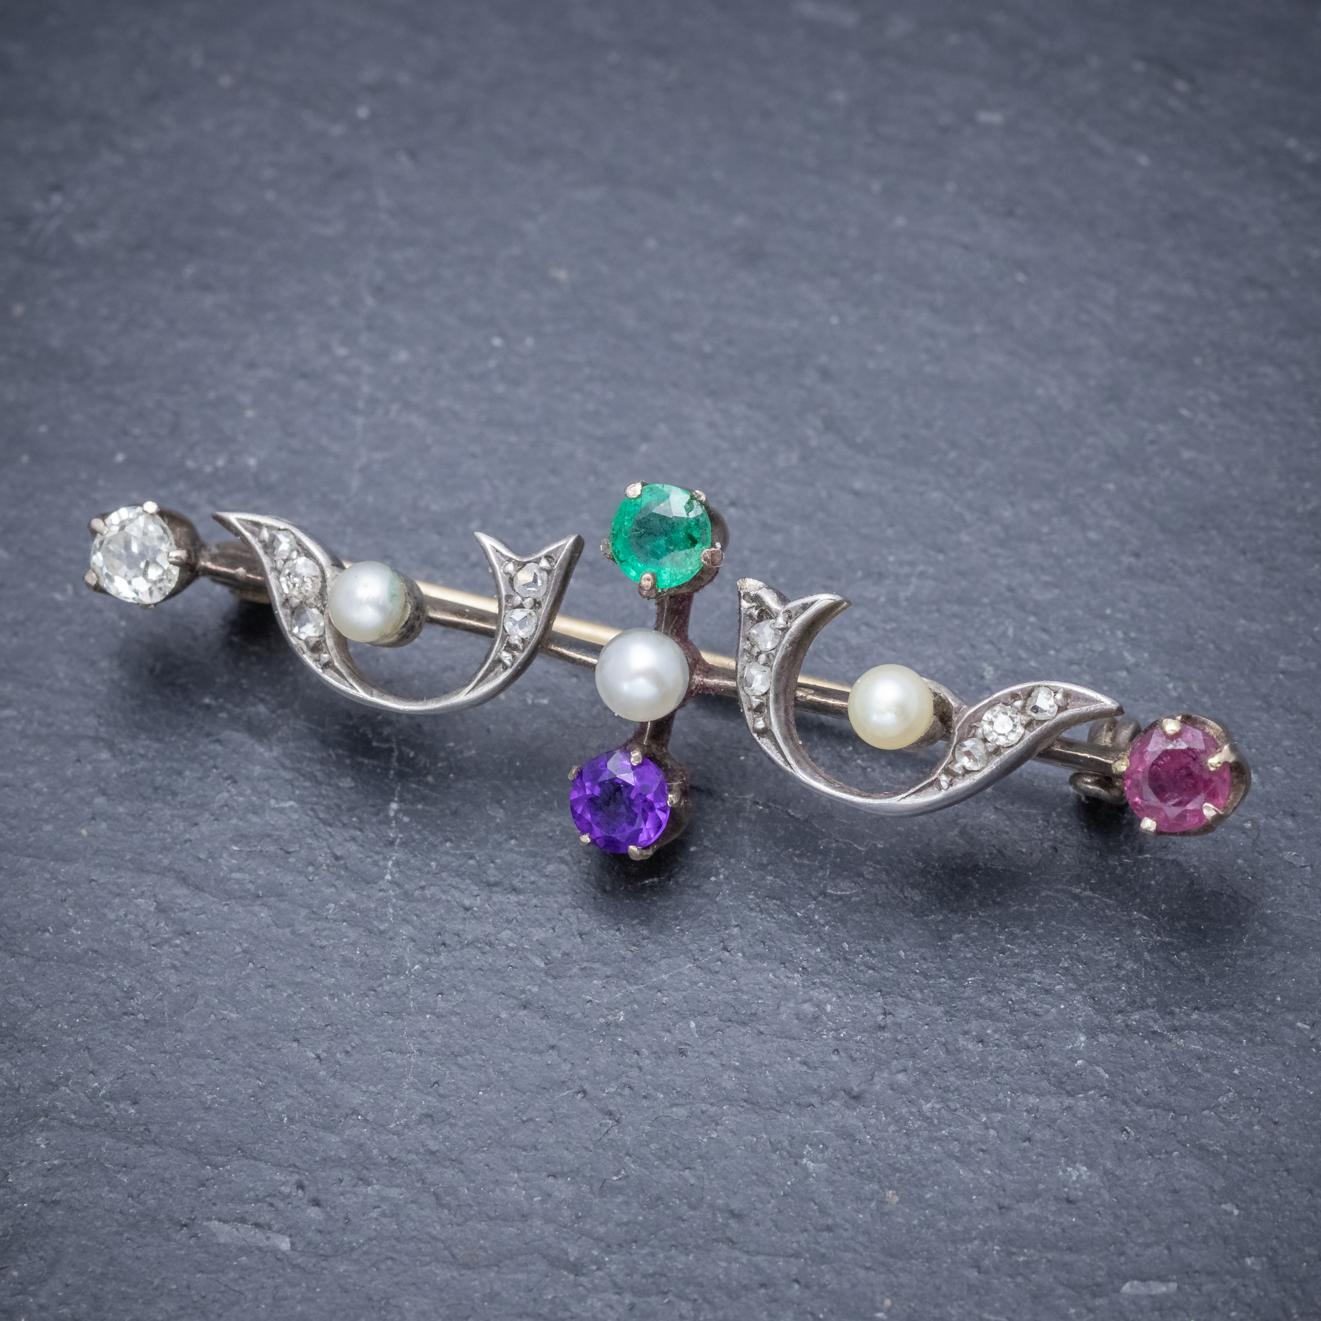 A splendid antique Victorian Dearest brooch decorated with Diamonds, Pearls and four gemstones at each end which spell out the word ‘DEAR’ with each first letter – Diamond, Emerald, Amethyst, Ruby. 

The stones are set in a fancy gallery modelled in